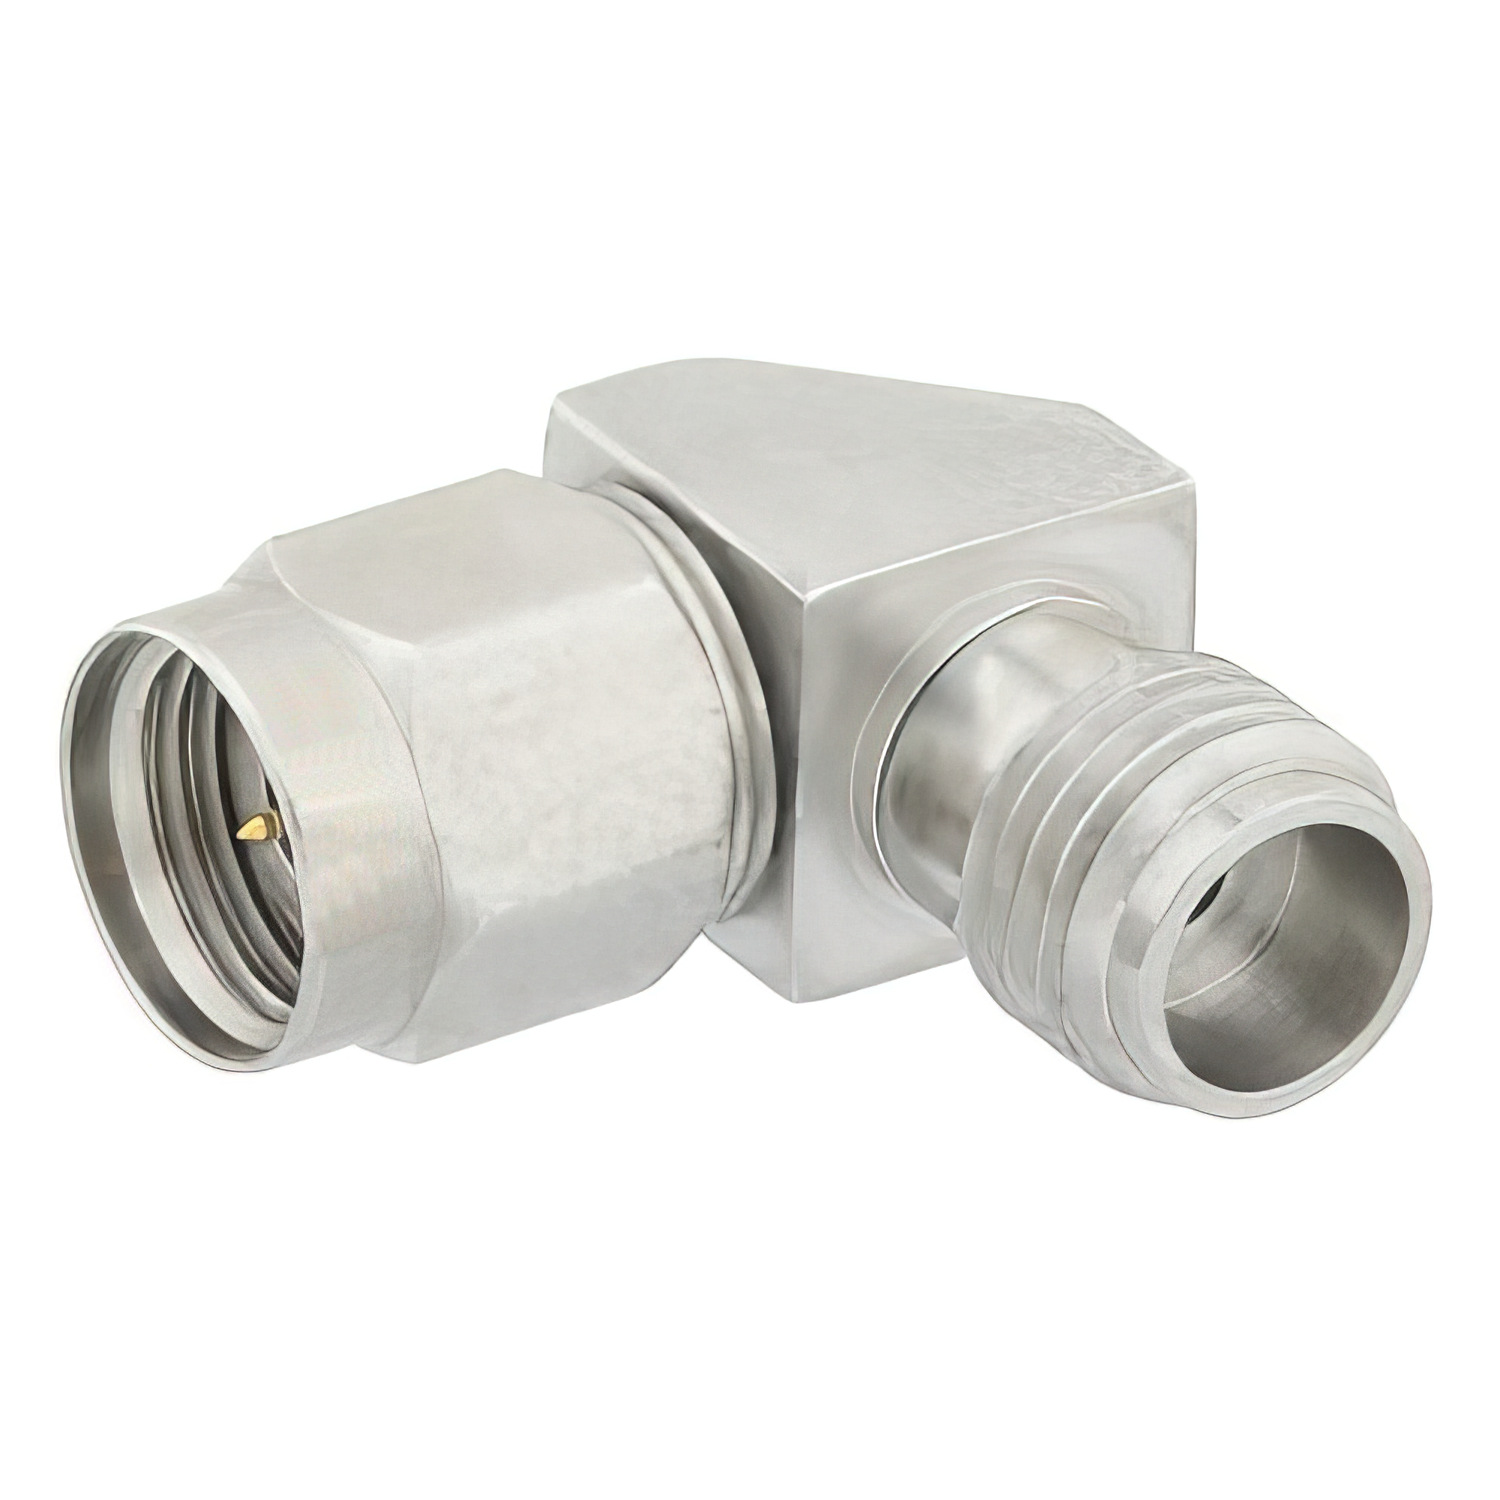 1.85mm Female to 2.4mm Male Right Angle Adapter1